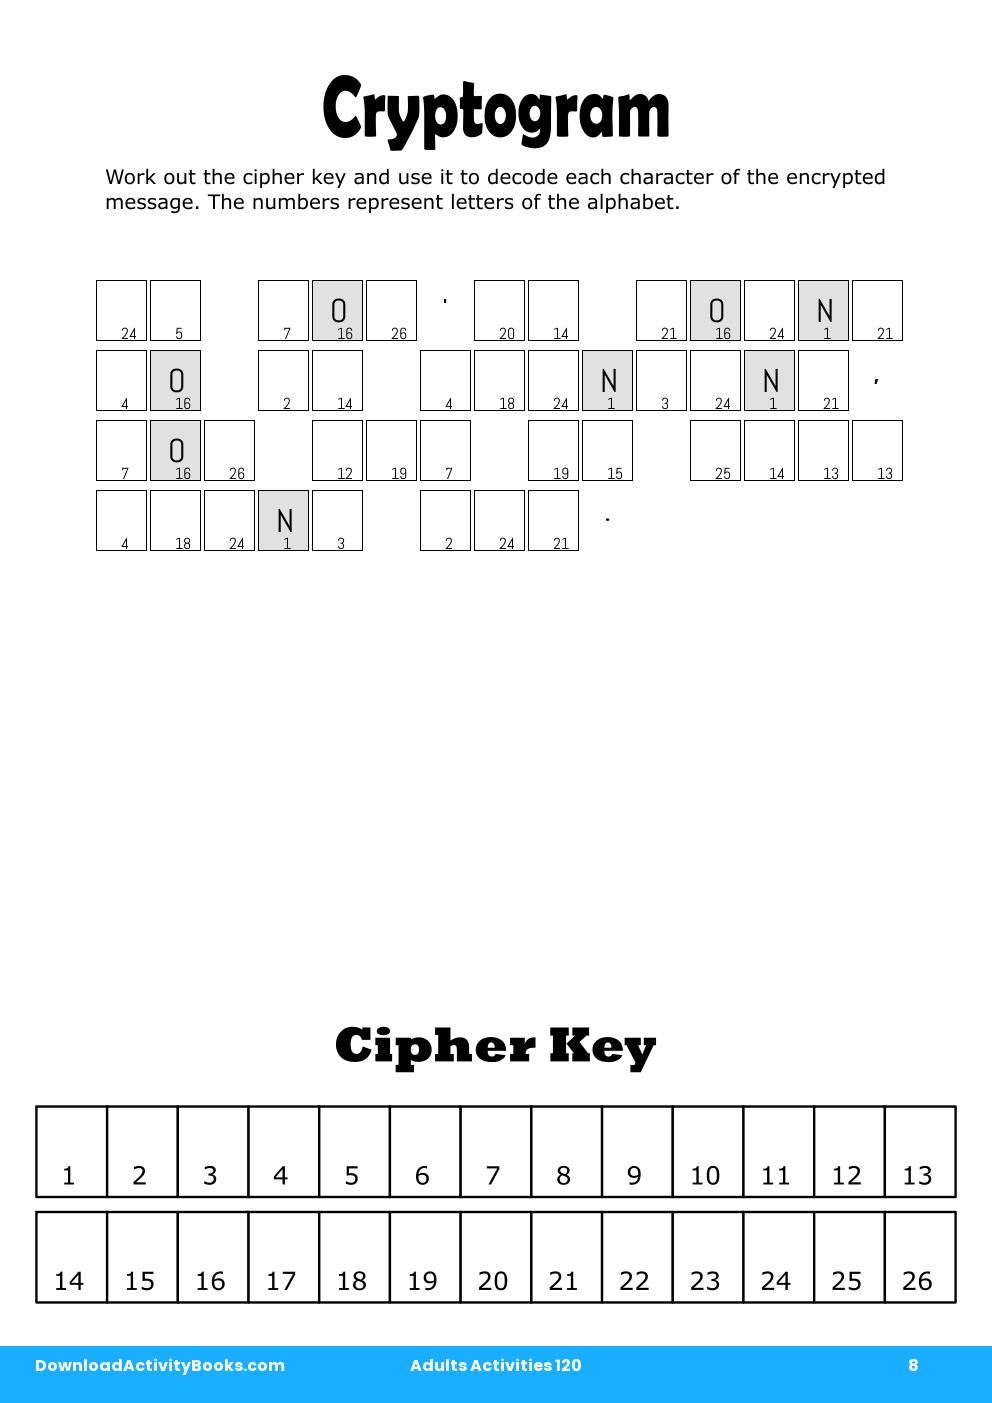 Cryptogram in Adults Activities 120